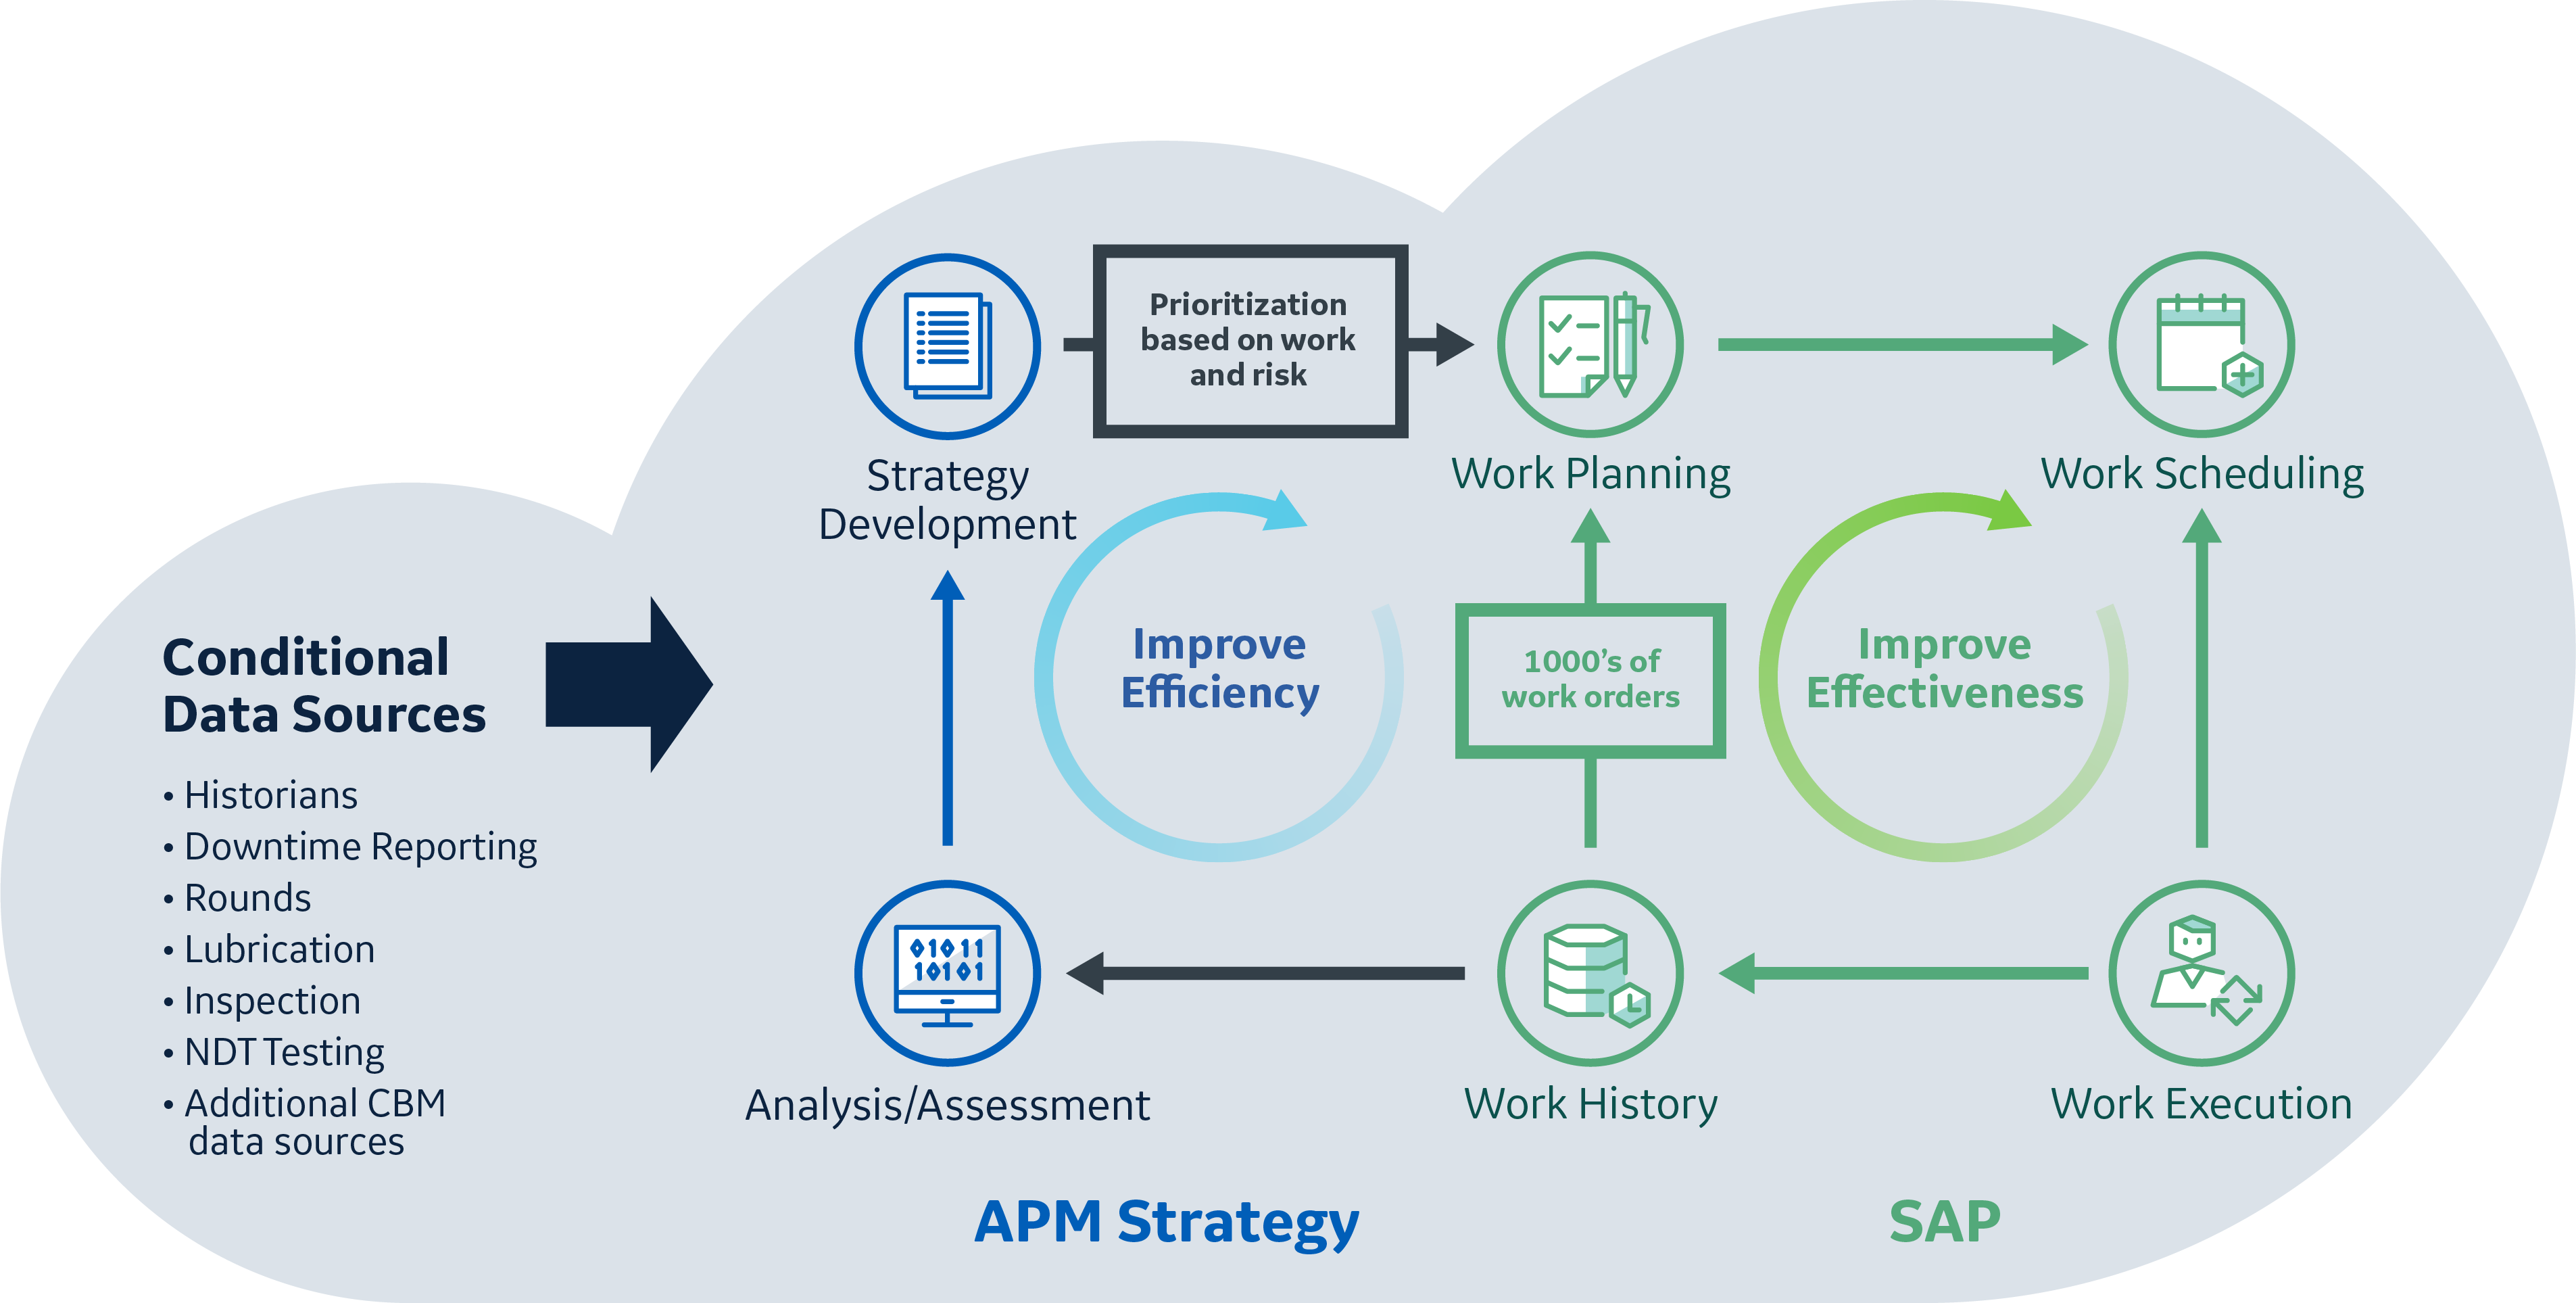 APM and SAP work in tandem to streamline the maintenance optimization process